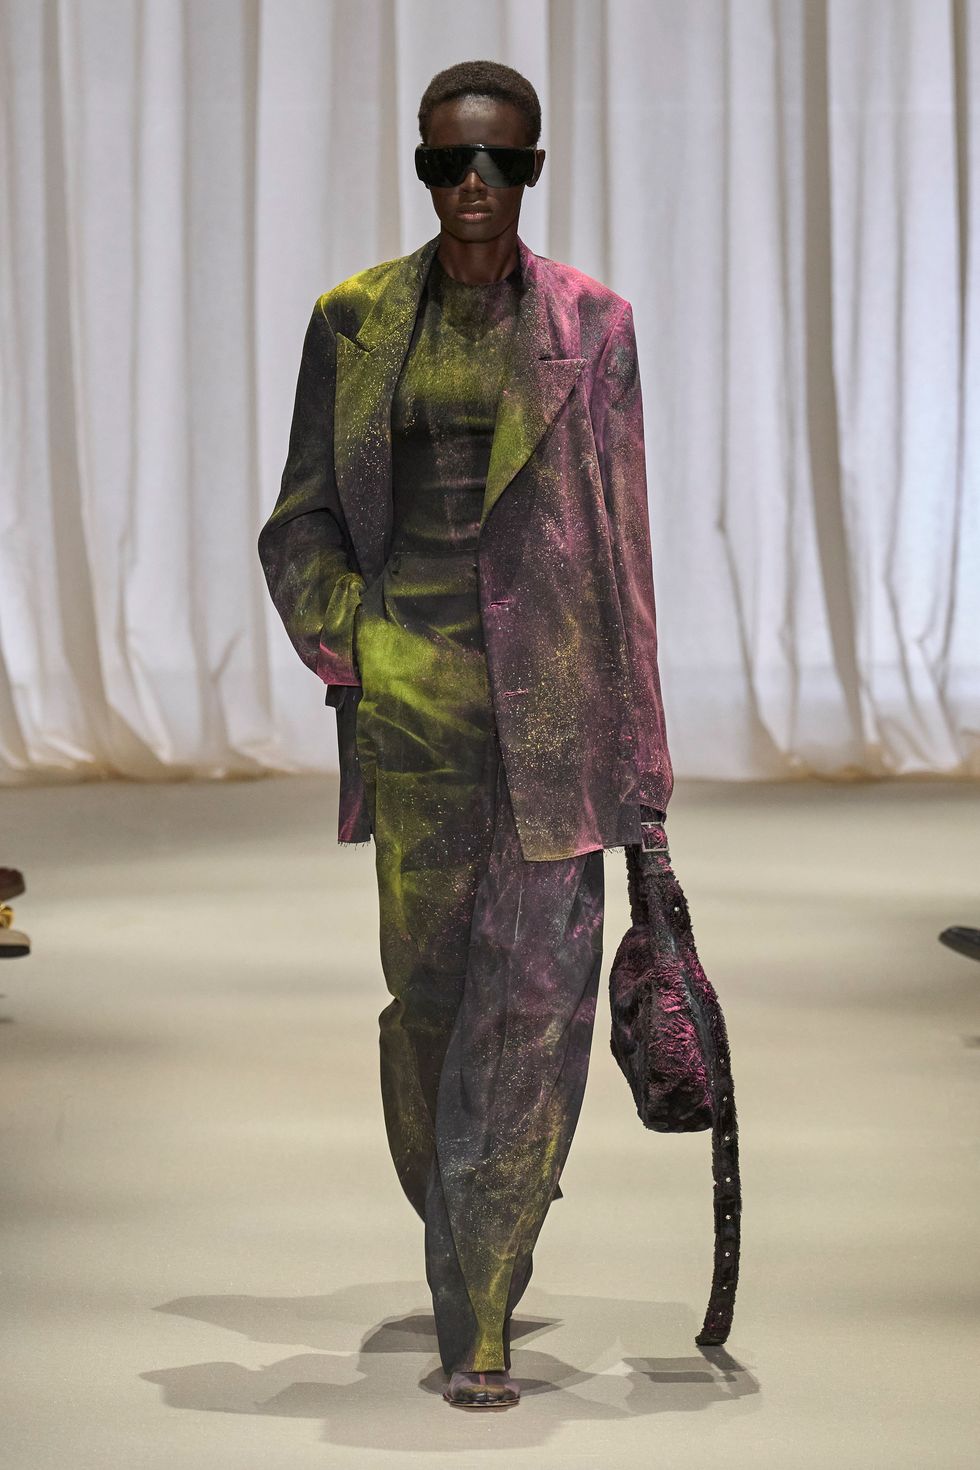 a person wearing a camouflage suit